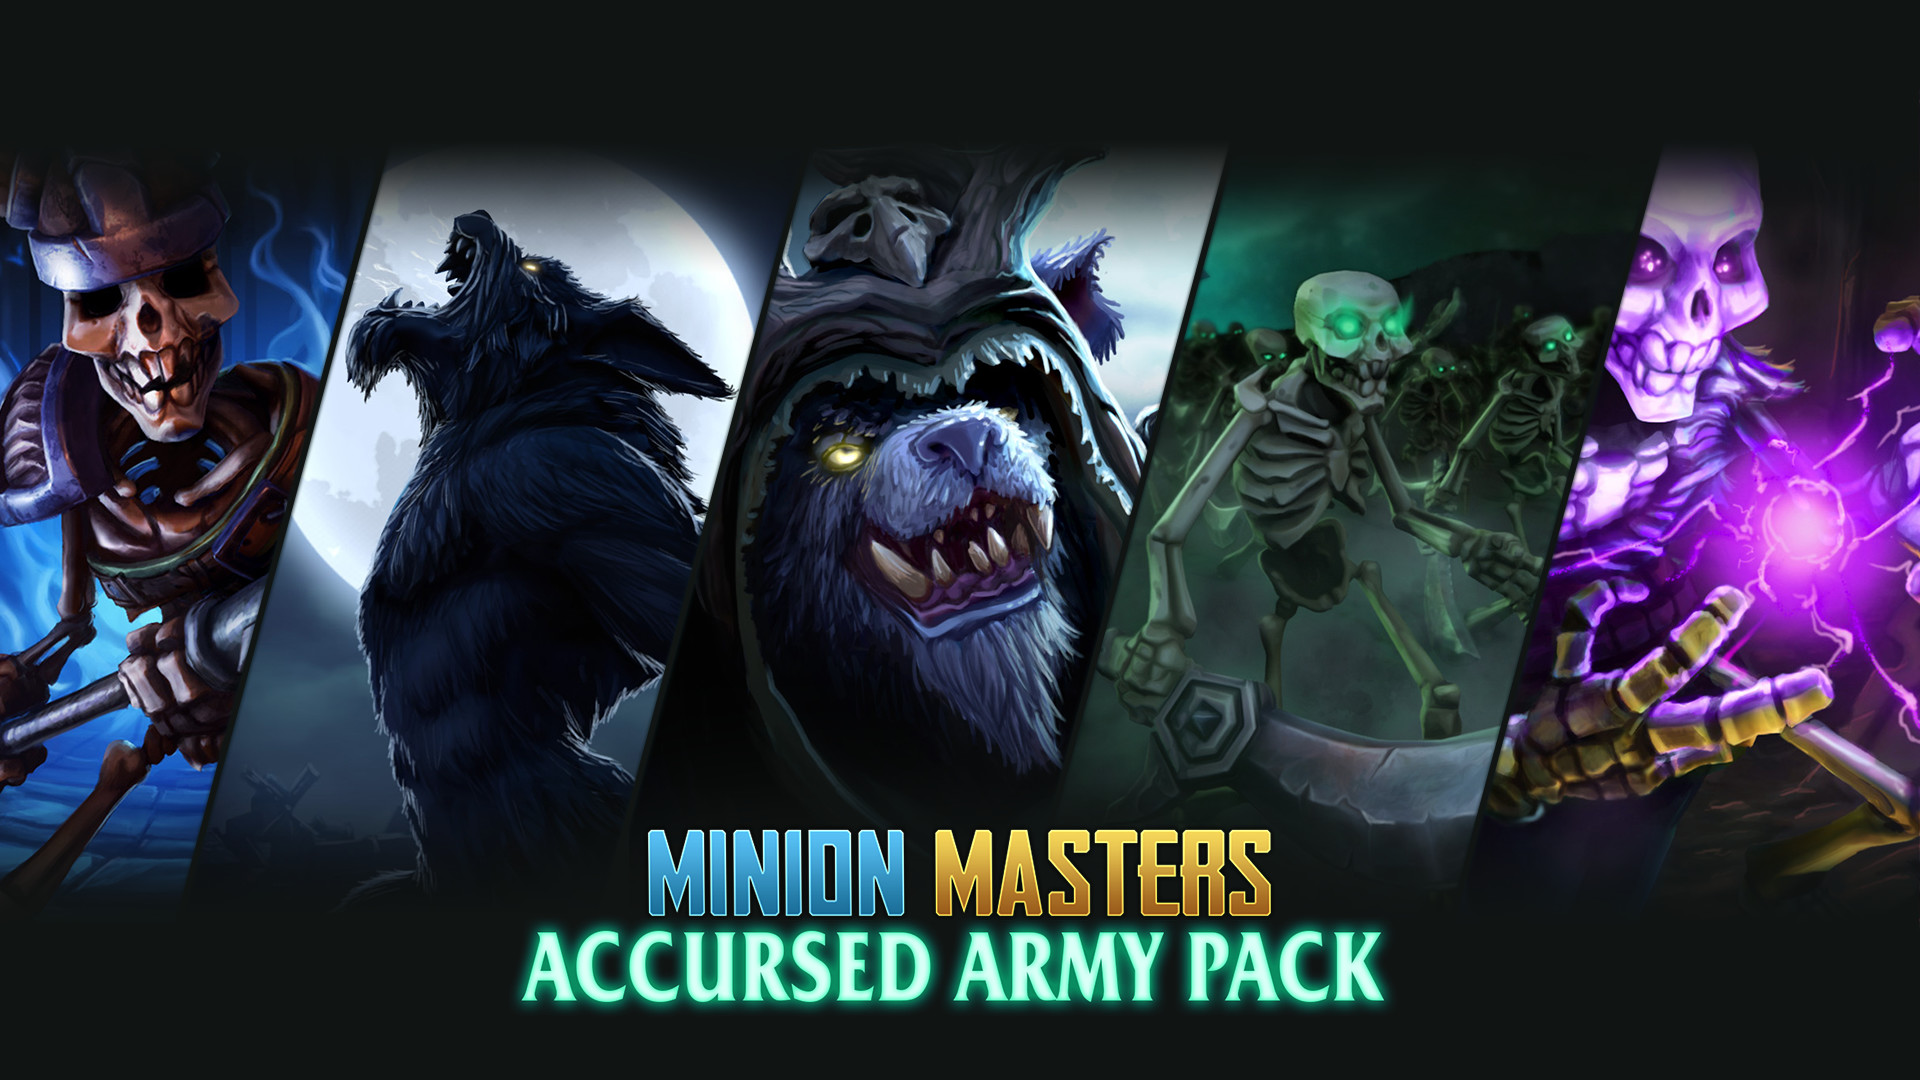 Minion Masters - Accursed Army Pack Featured Screenshot #1